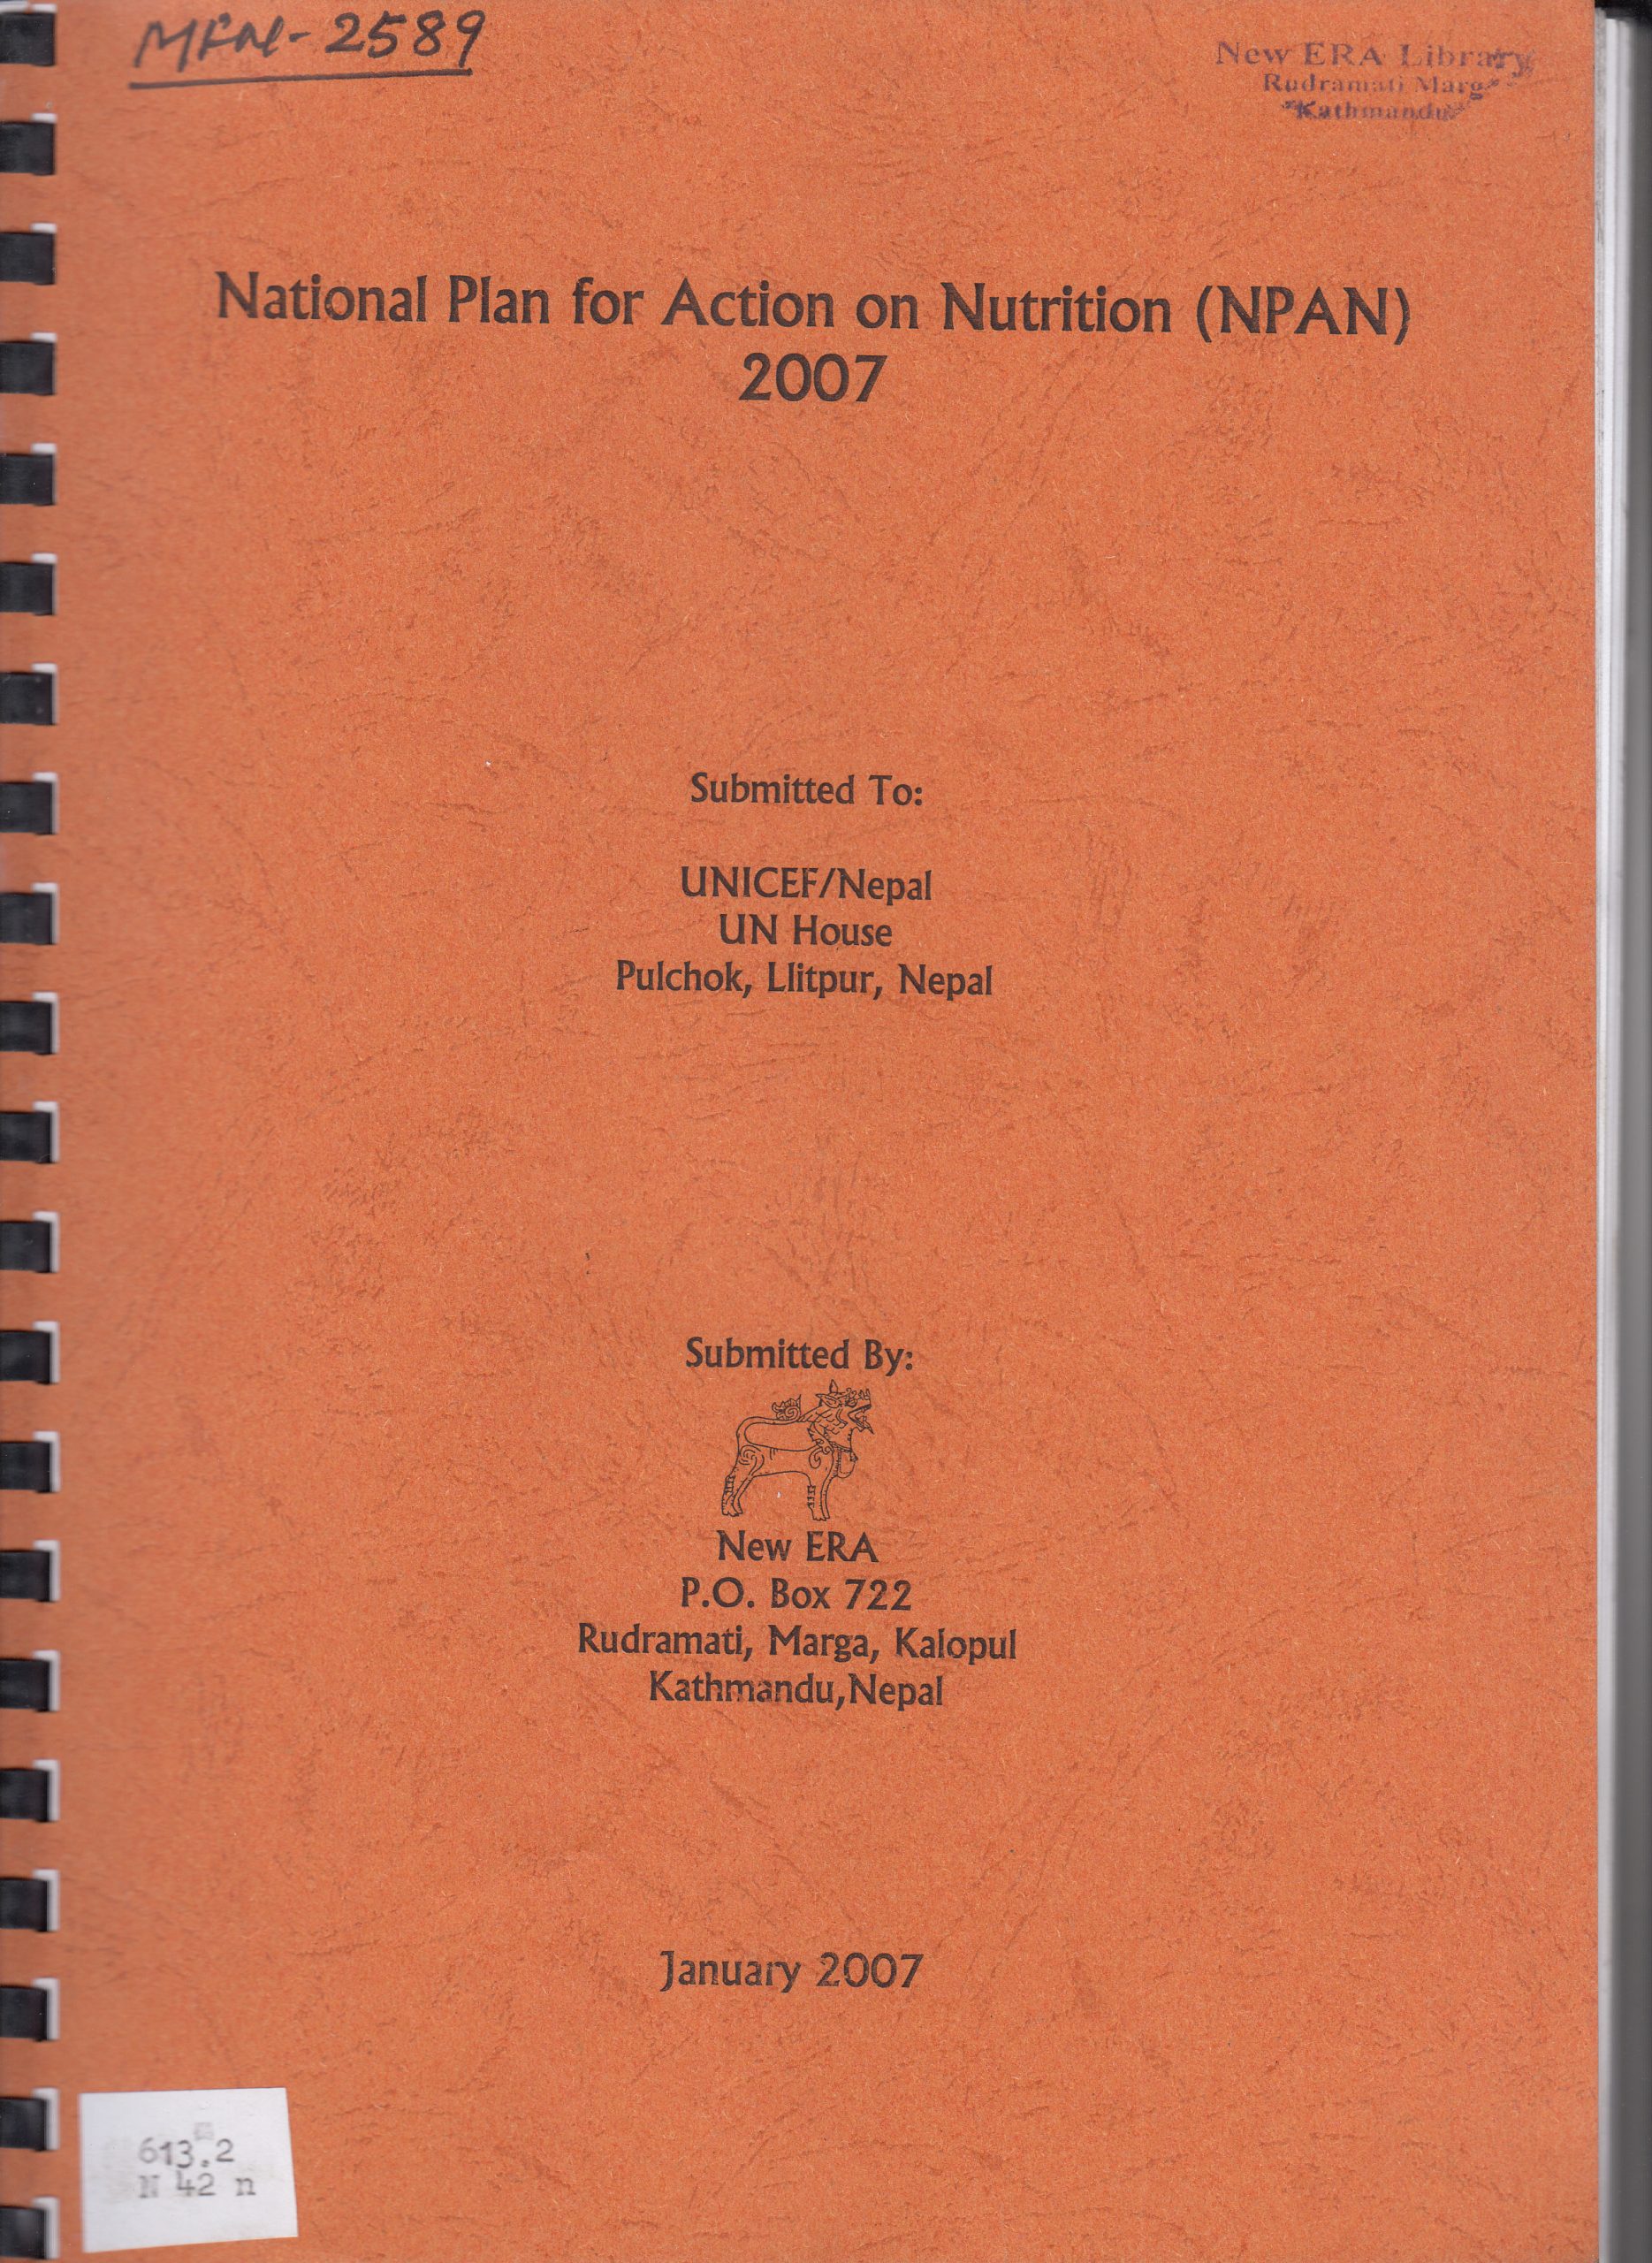 National Plan for Action on Nutrition (NPAN) 2007